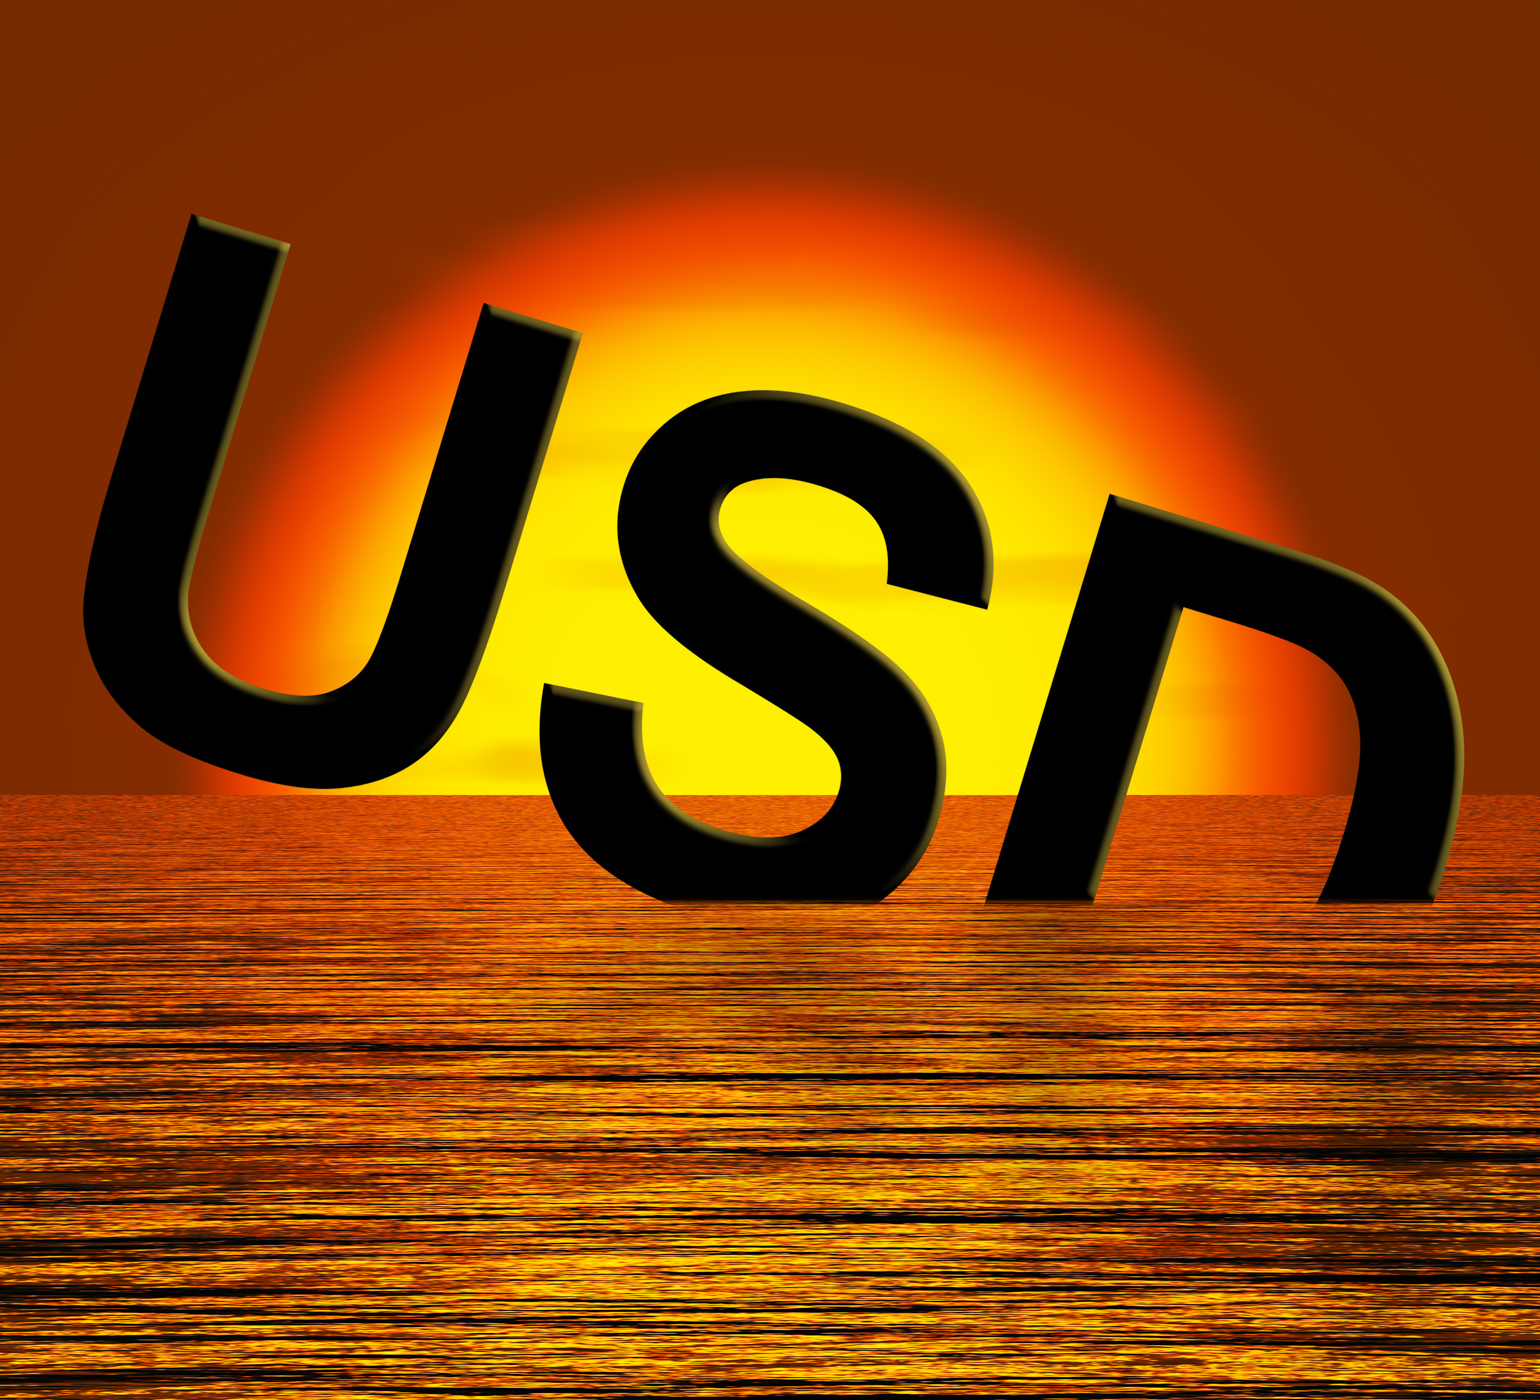 Usd sinking and sunset showing depression recession and economic downt photo